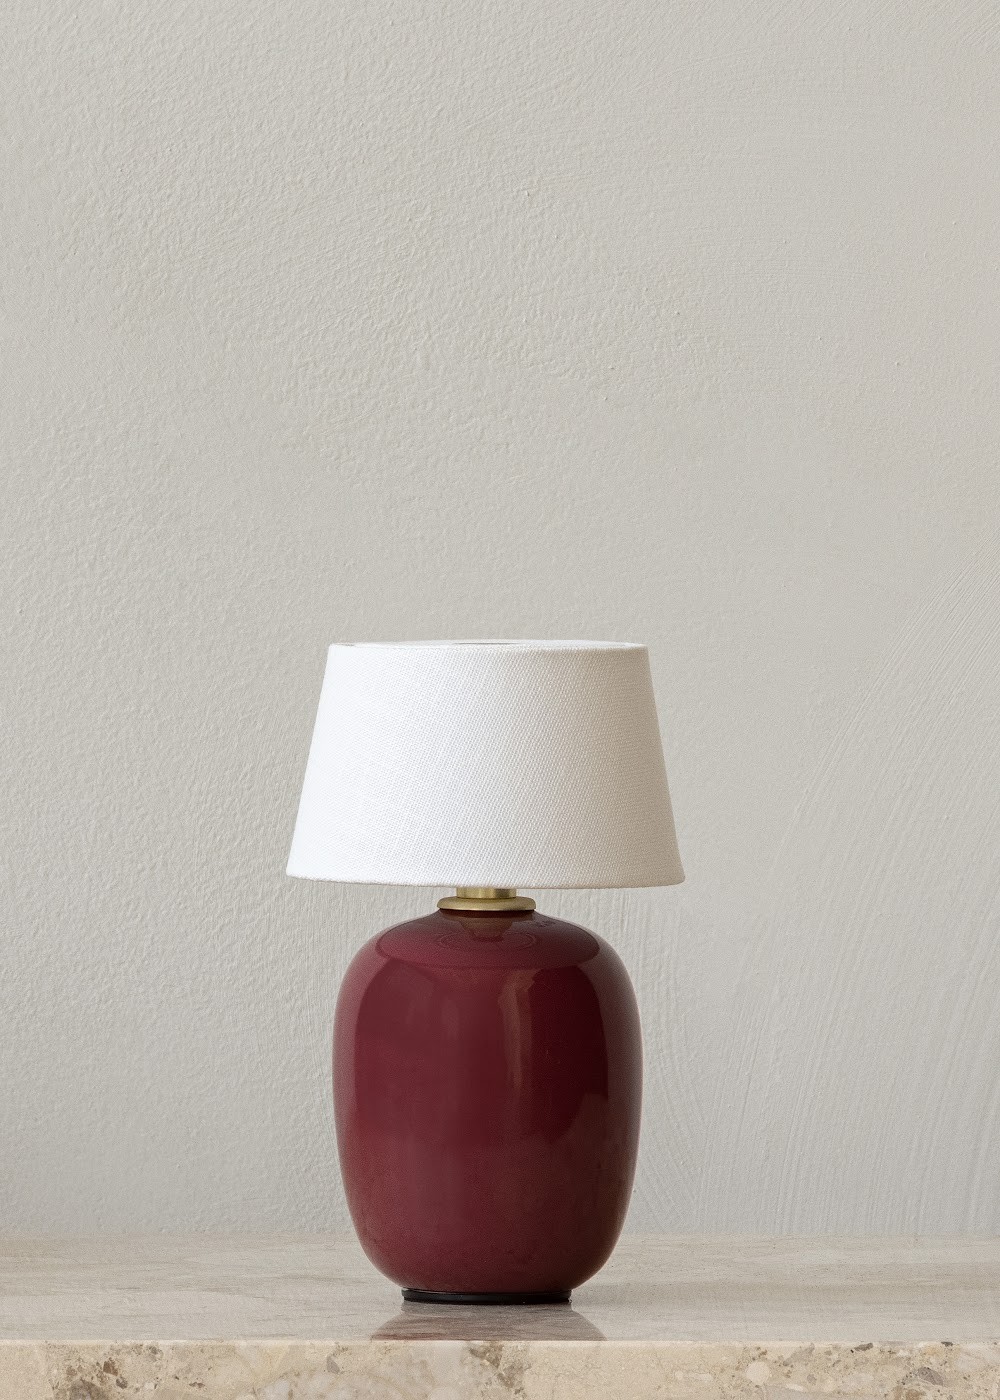 a red vase sitting on top of a table next to a white lamp